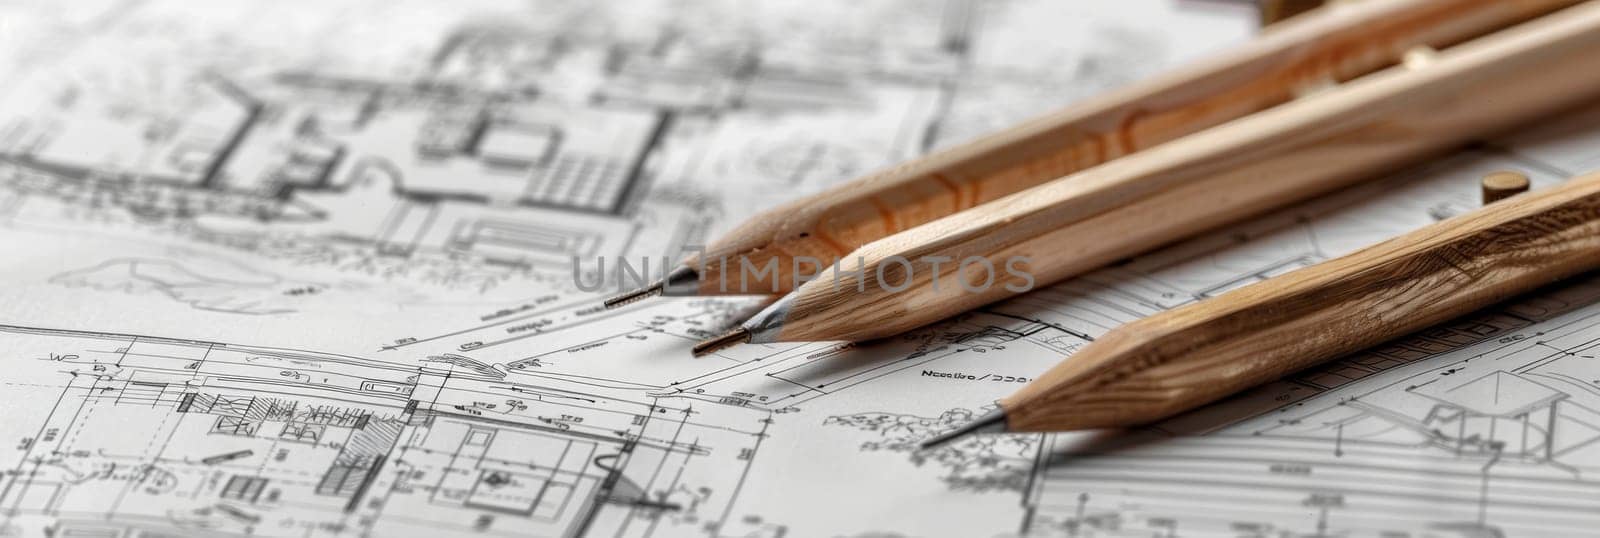 Two vibrant pencils and a sleek ruler rest atop a detailed blueprint showcasing project renovation sketch and design plans.